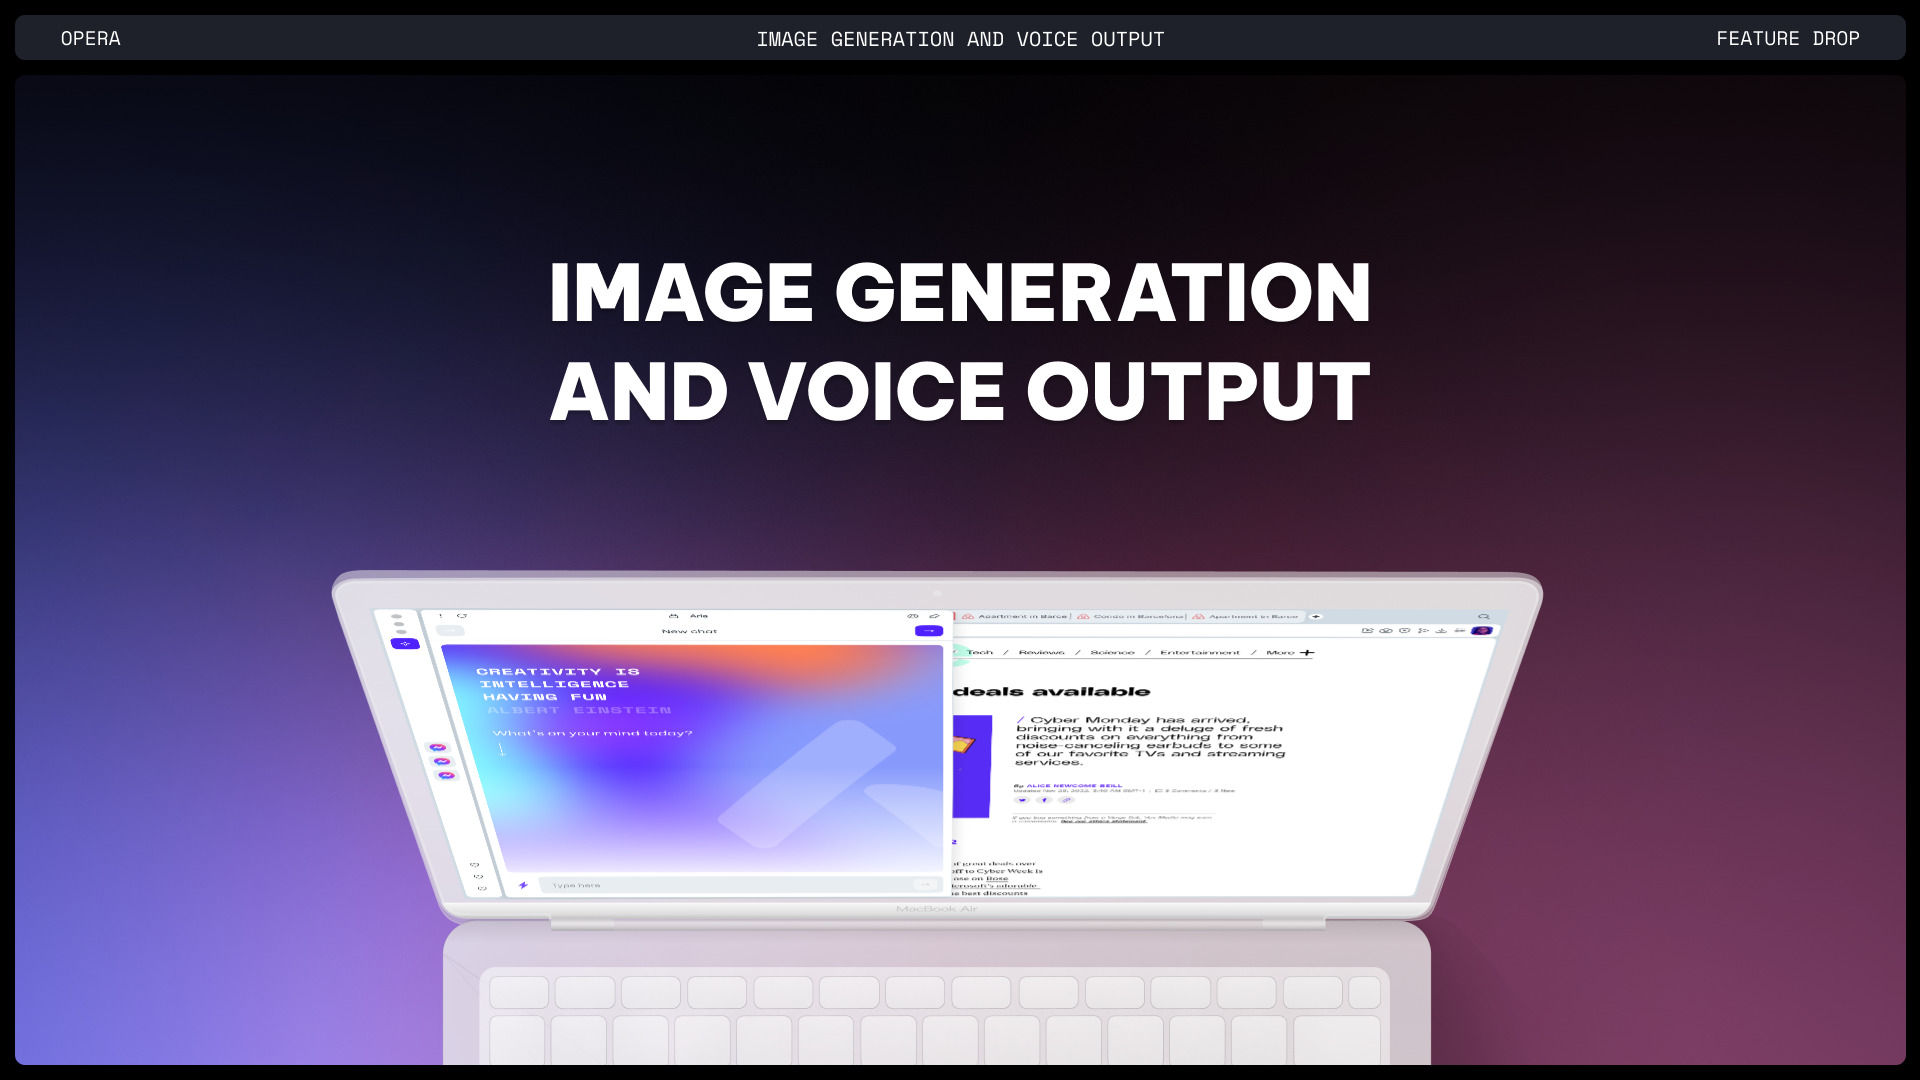 Aira, Opera's integrated AI assistant, gets two new features: Image Generation and Voice Output.